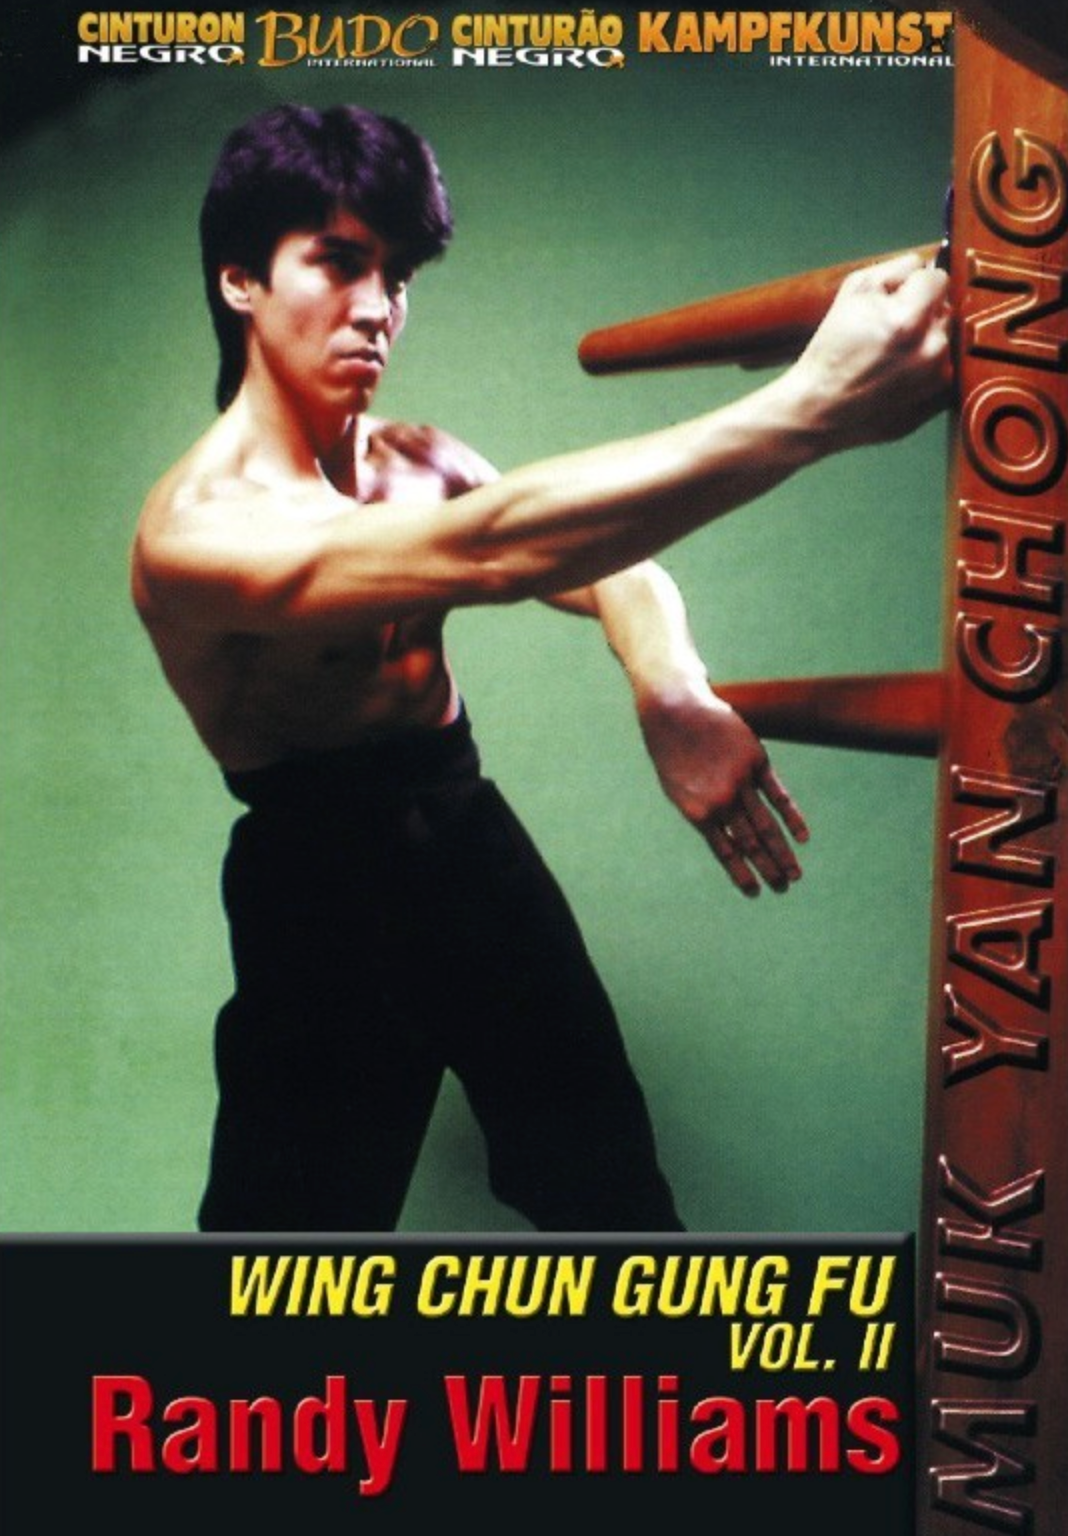 Wing Chun Wooden Dummy Form Part 2 DVD by Randy Williams - Budovideos Inc